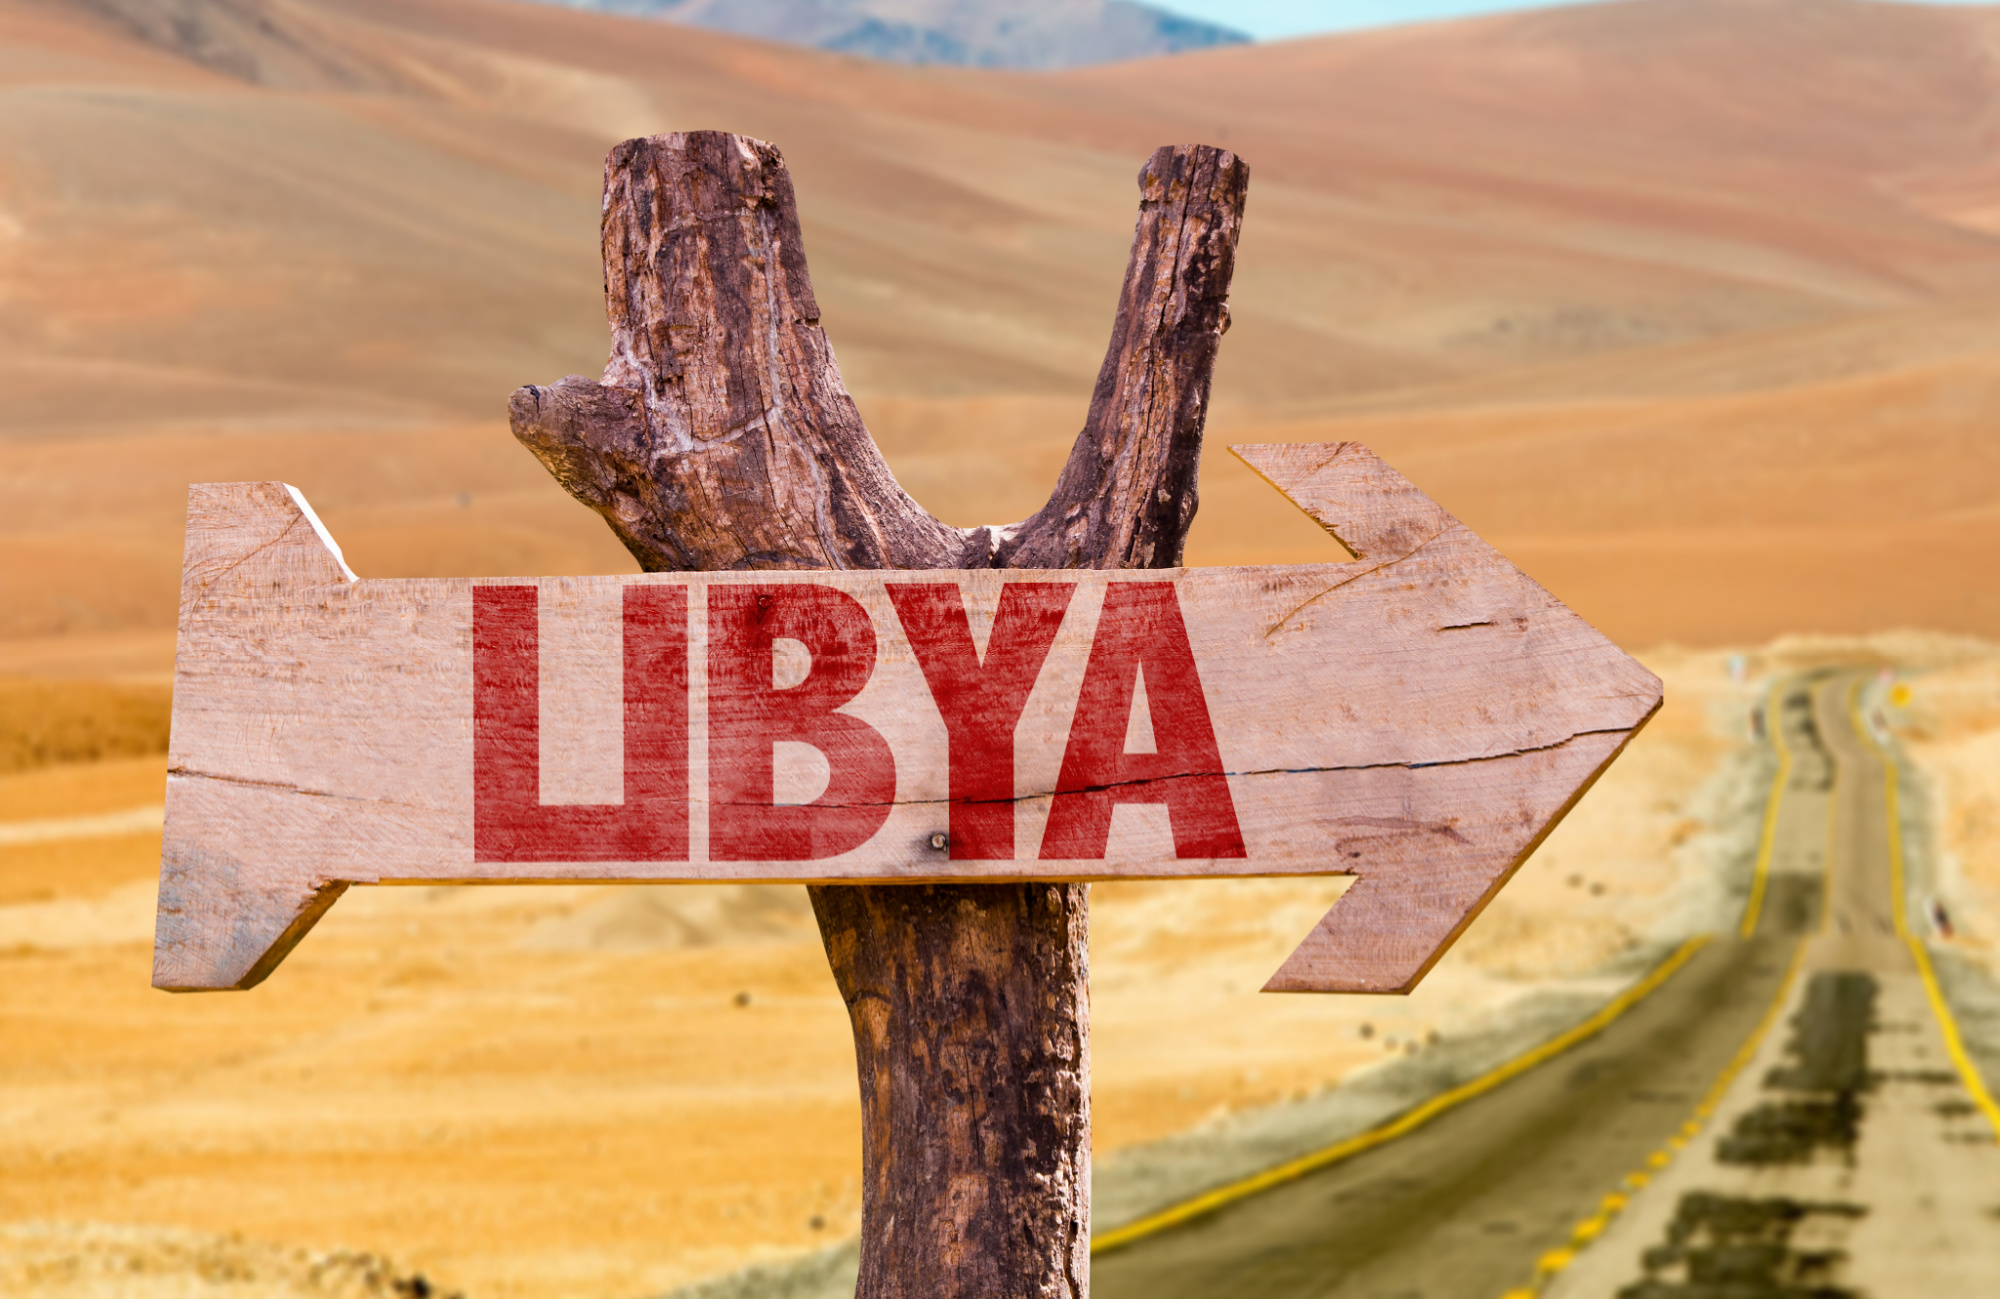 Is Libya safe to overfly yet?